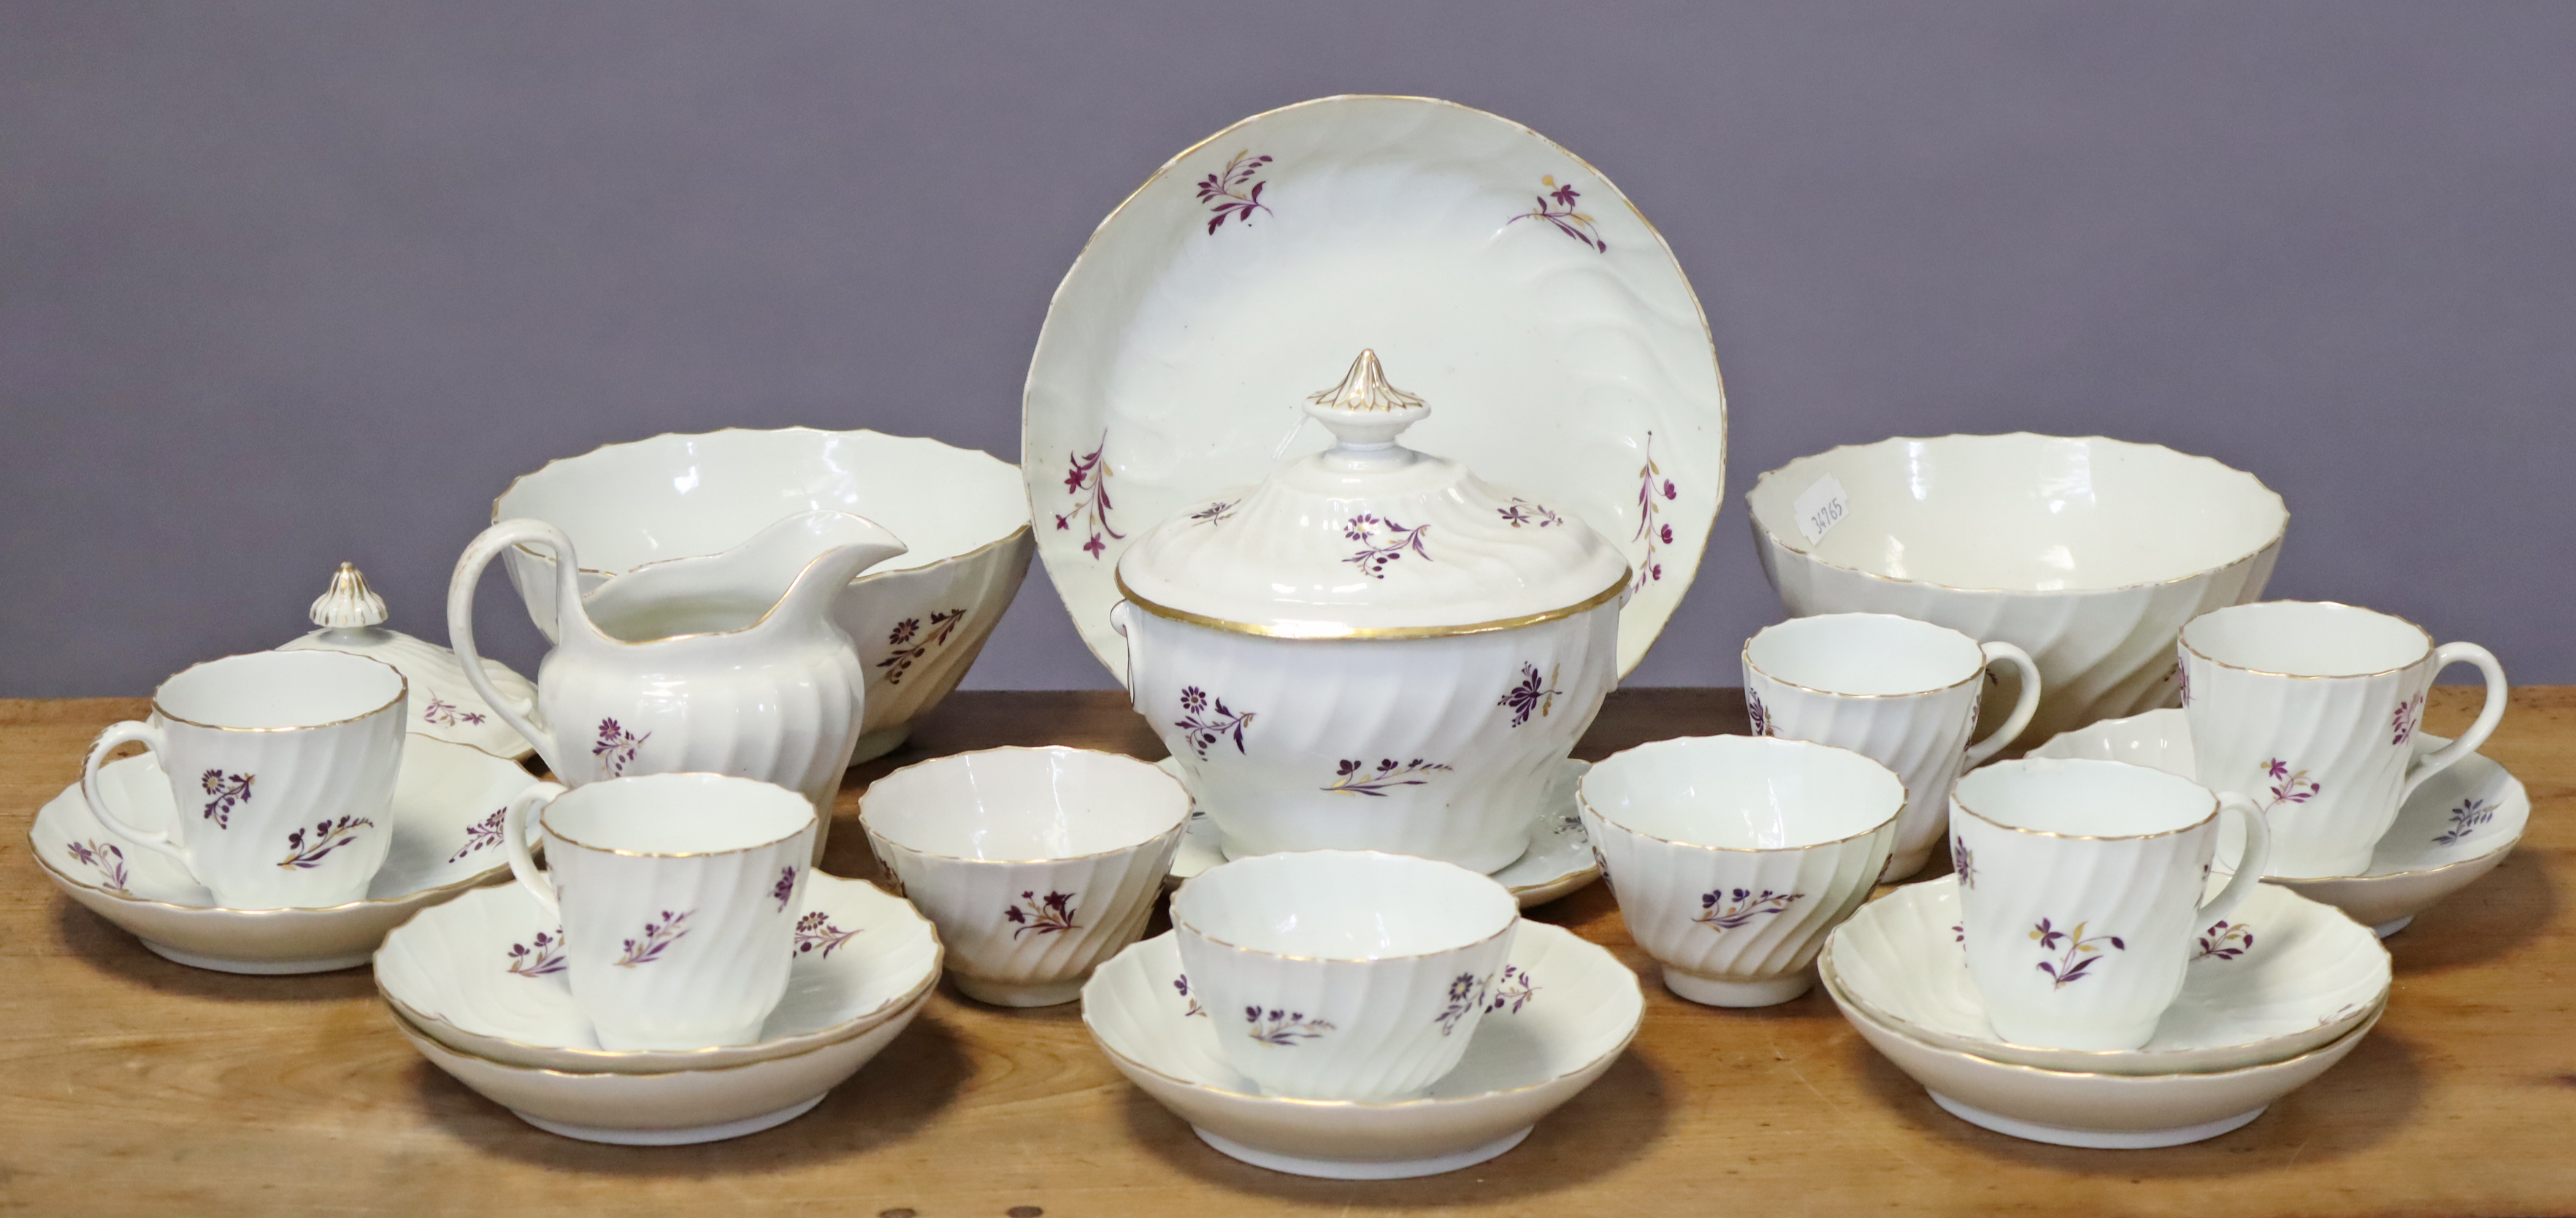 Twenty-two items of late 18th/early 19th century English porcelain tea & coffee ware of spiral